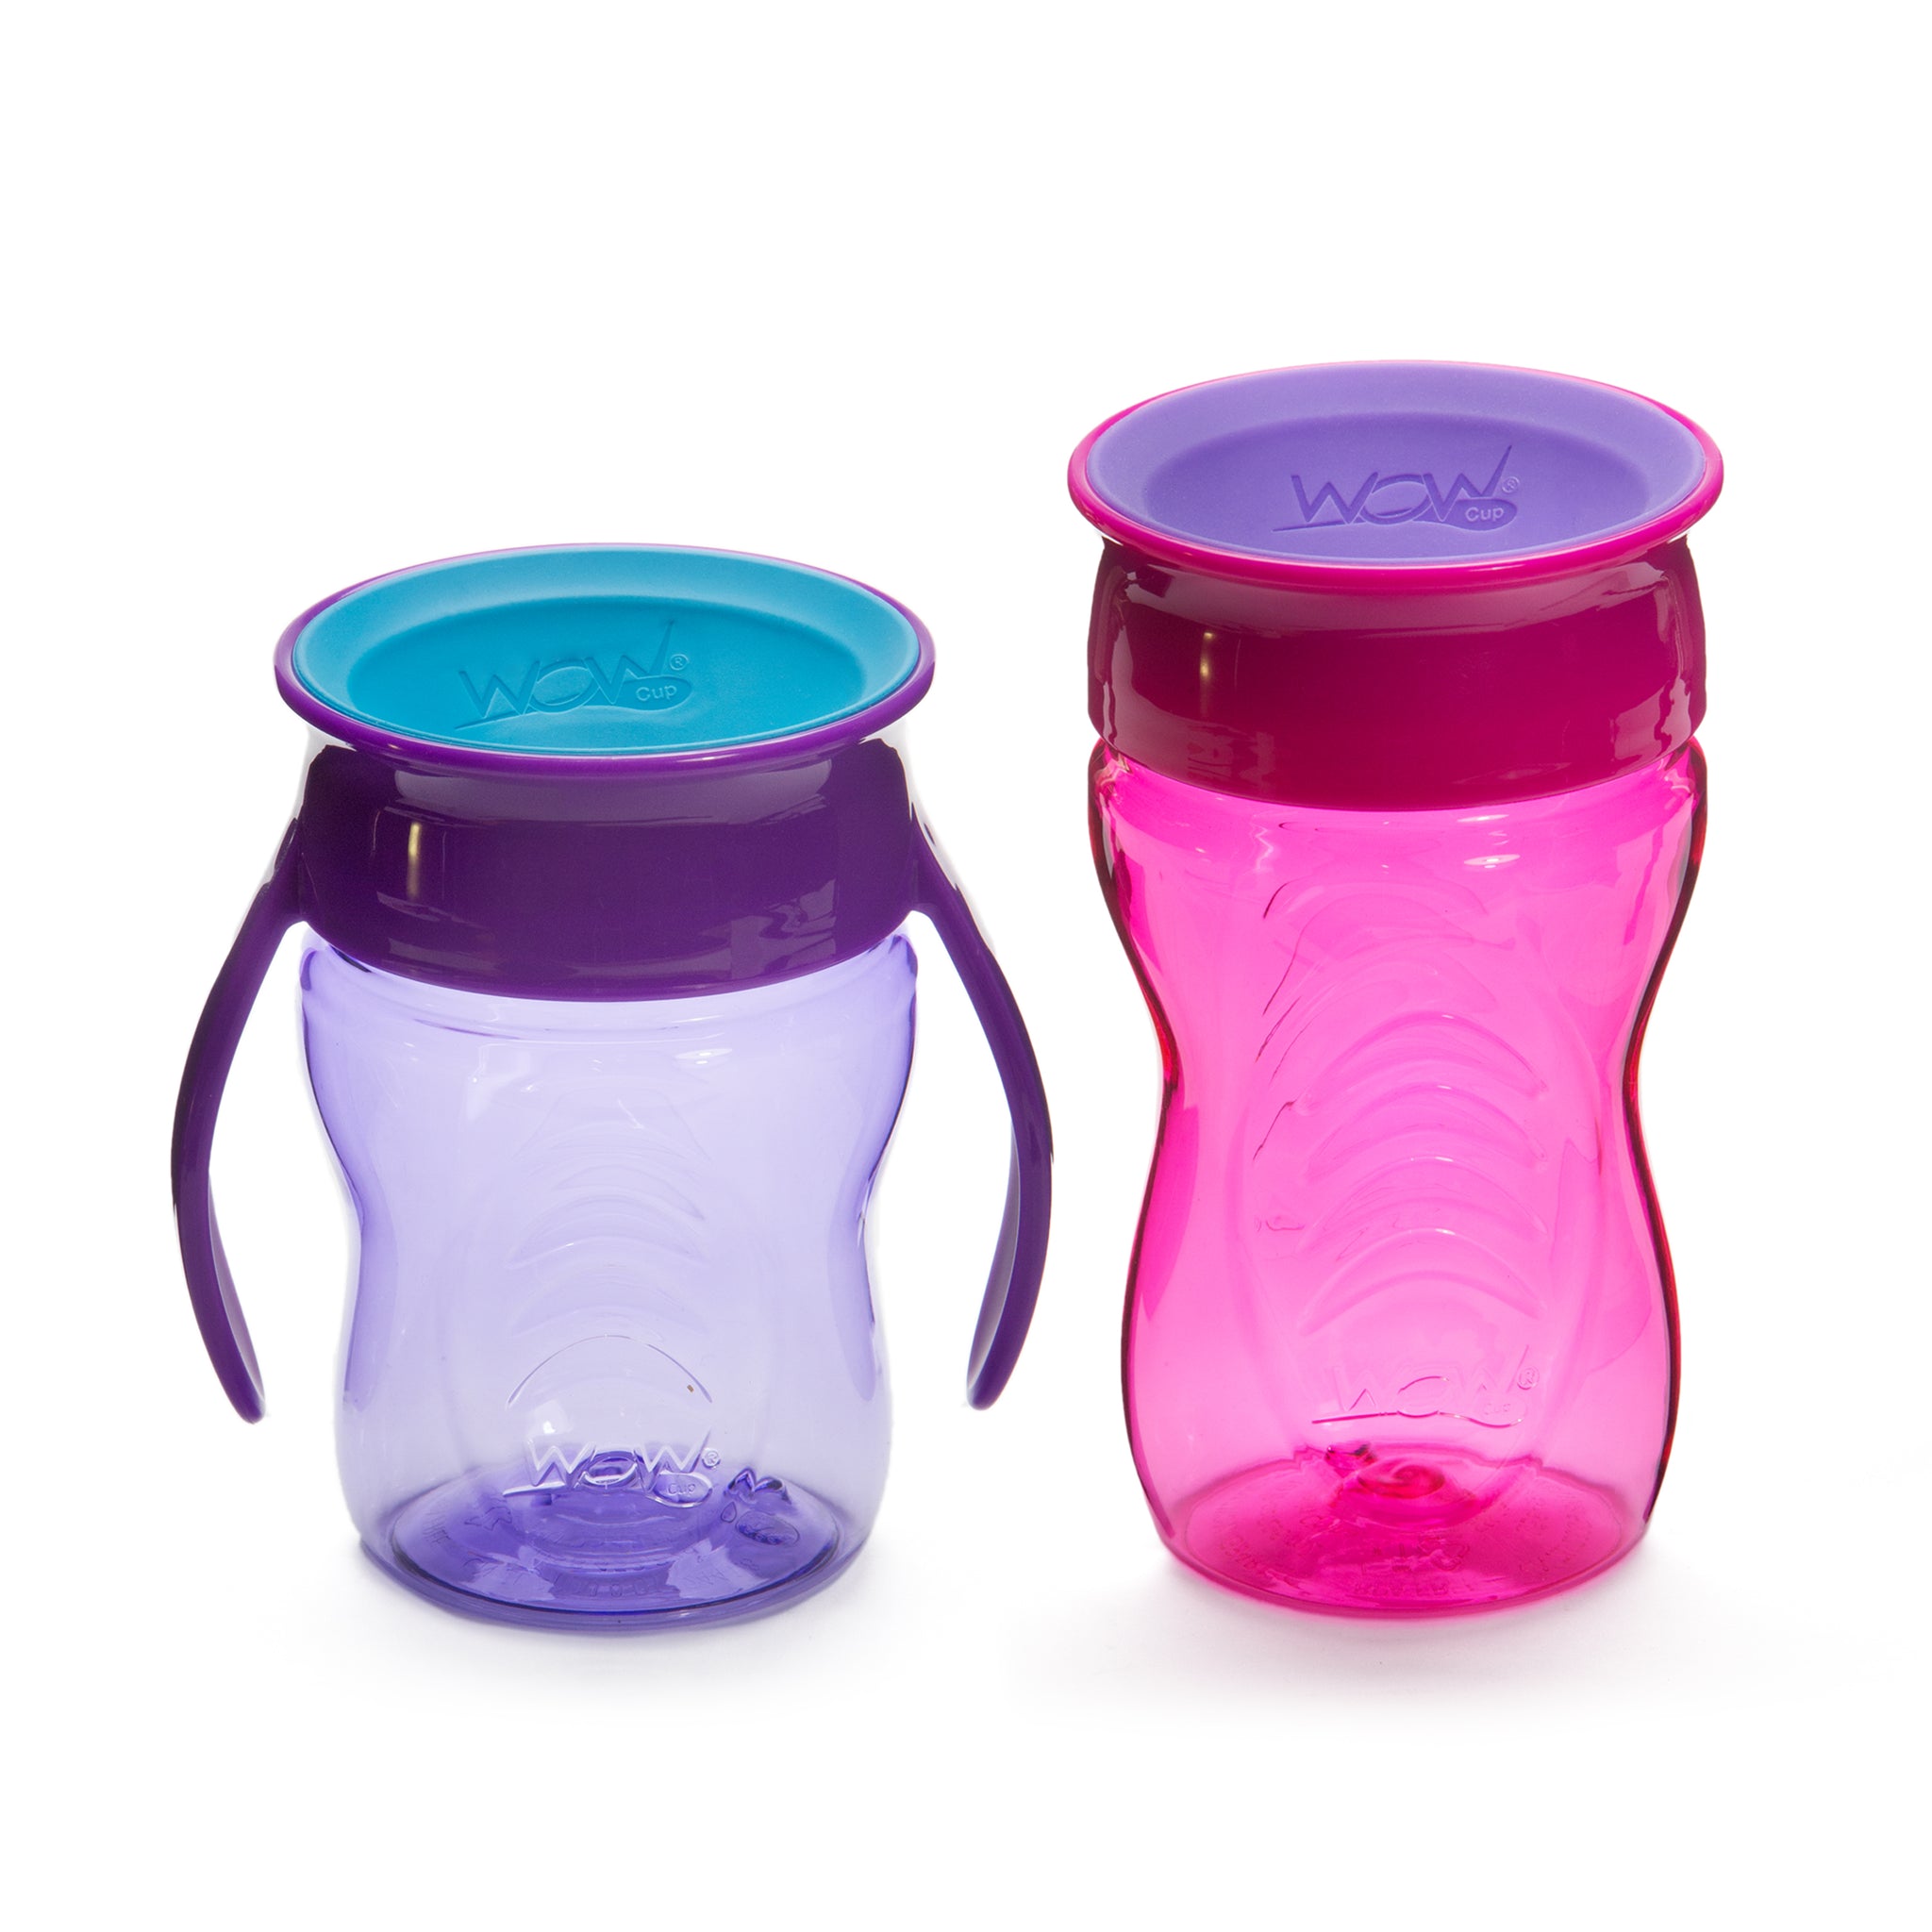 WOW CUP for Baby 360 Transition Cup - Blue, 7 oz. /207 ml - WOW GEAR